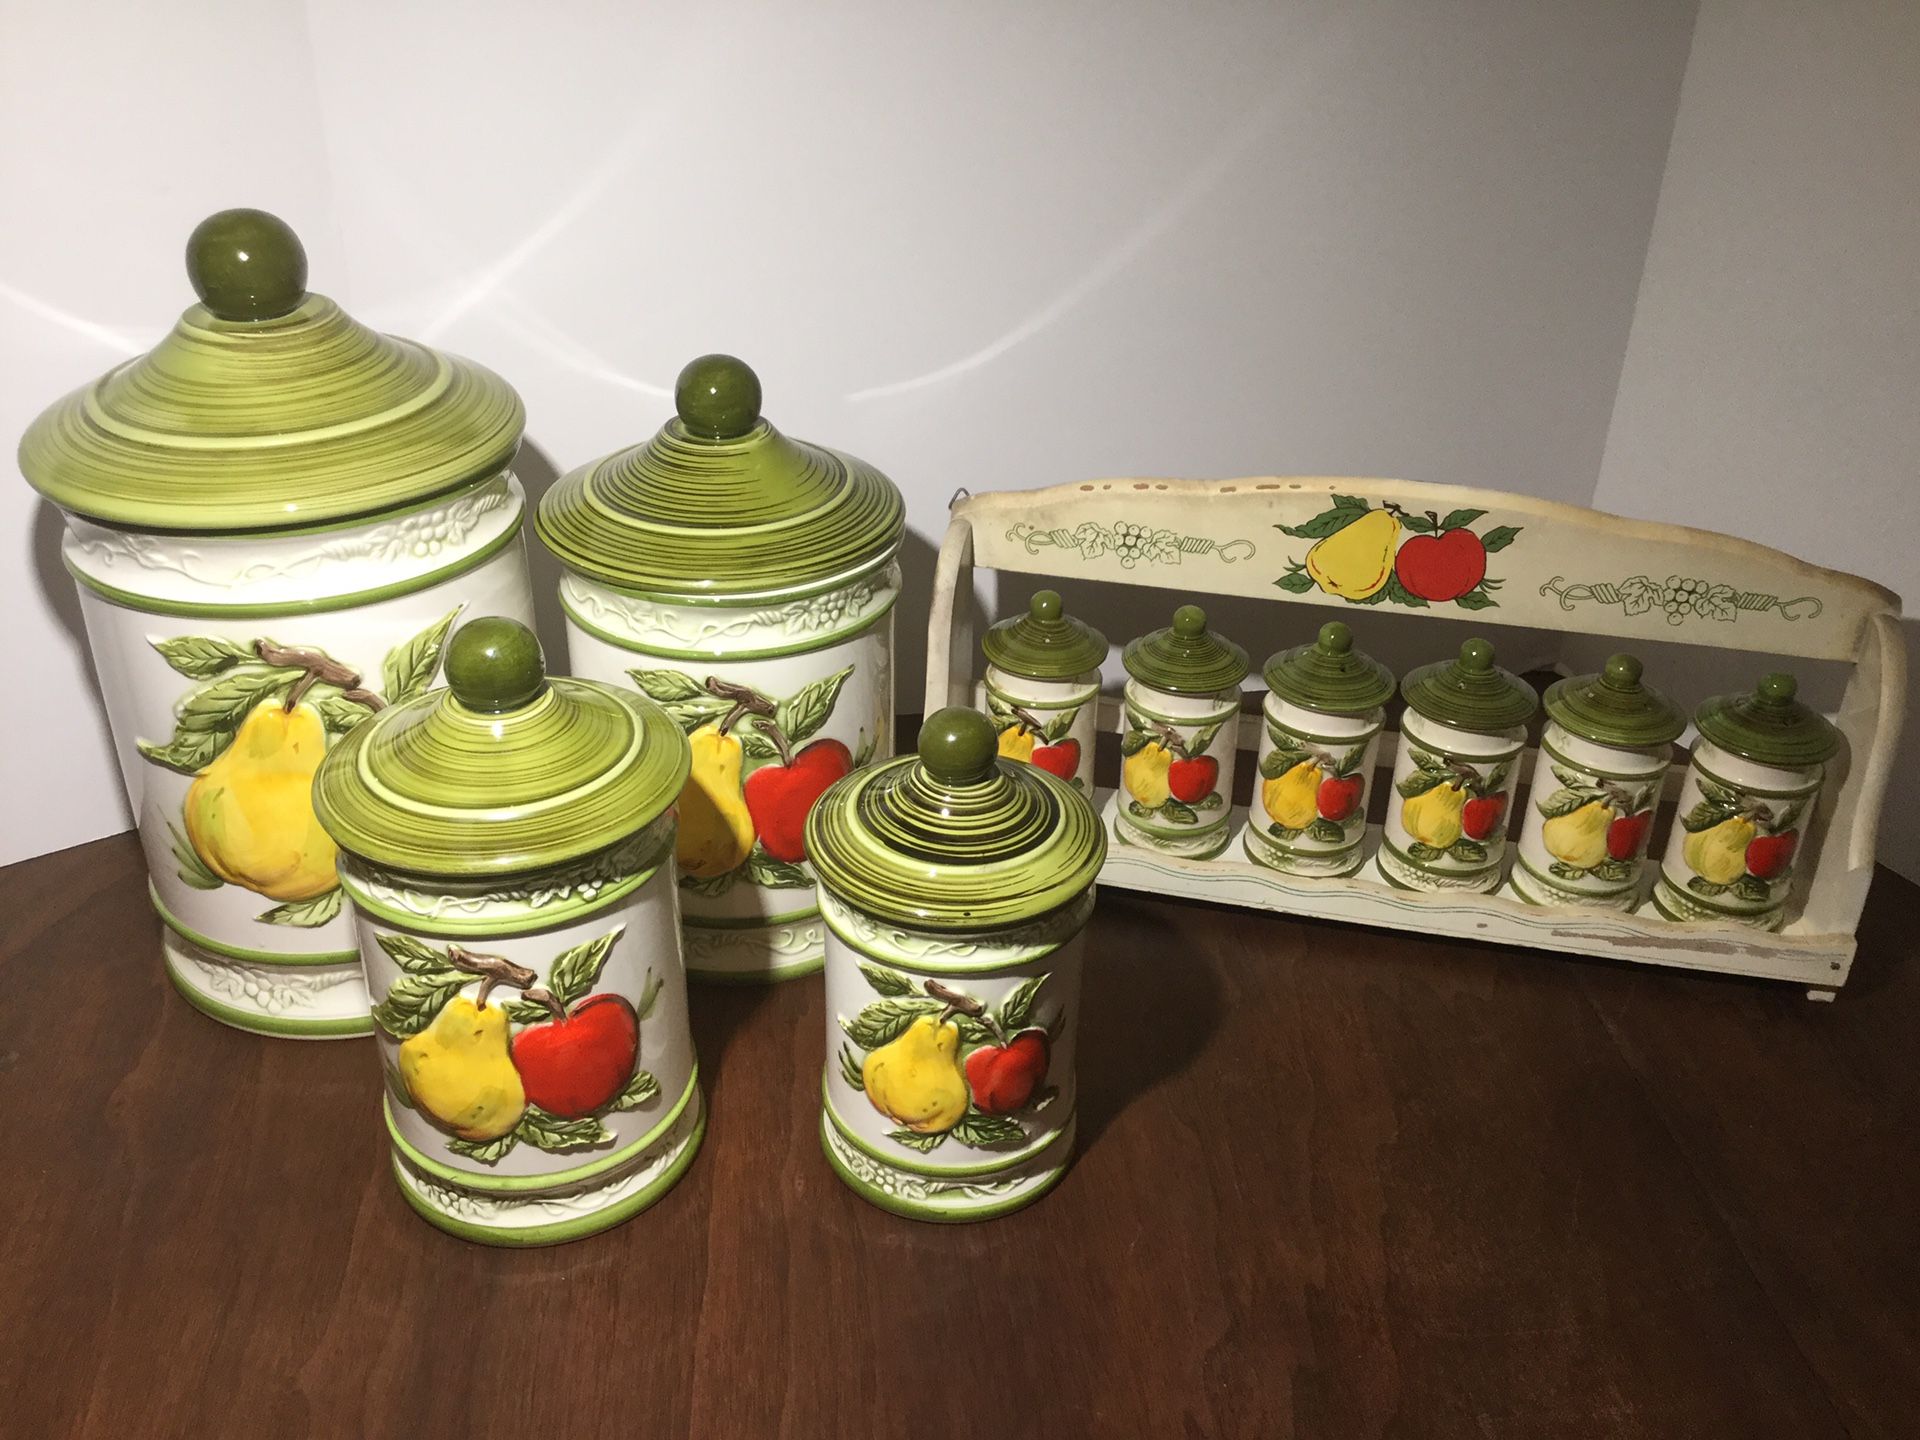 RETRO 1970’s CANISTER AND MATCHING SPICE SET plus 2 other offers pictured and in description